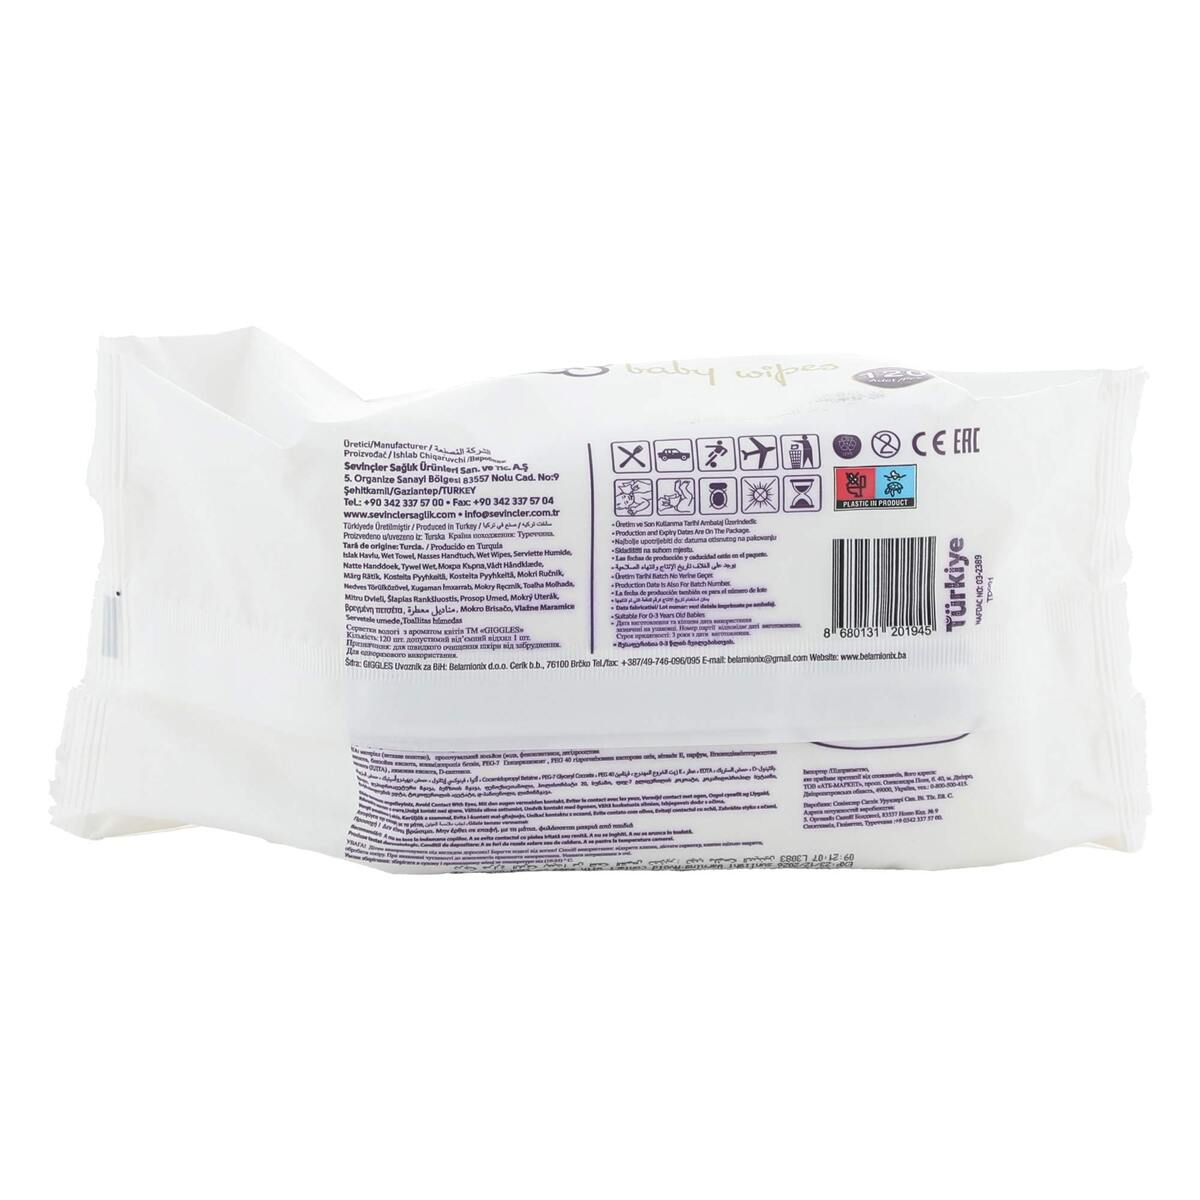 Giggles Baby Wet Wipes 120 pcs